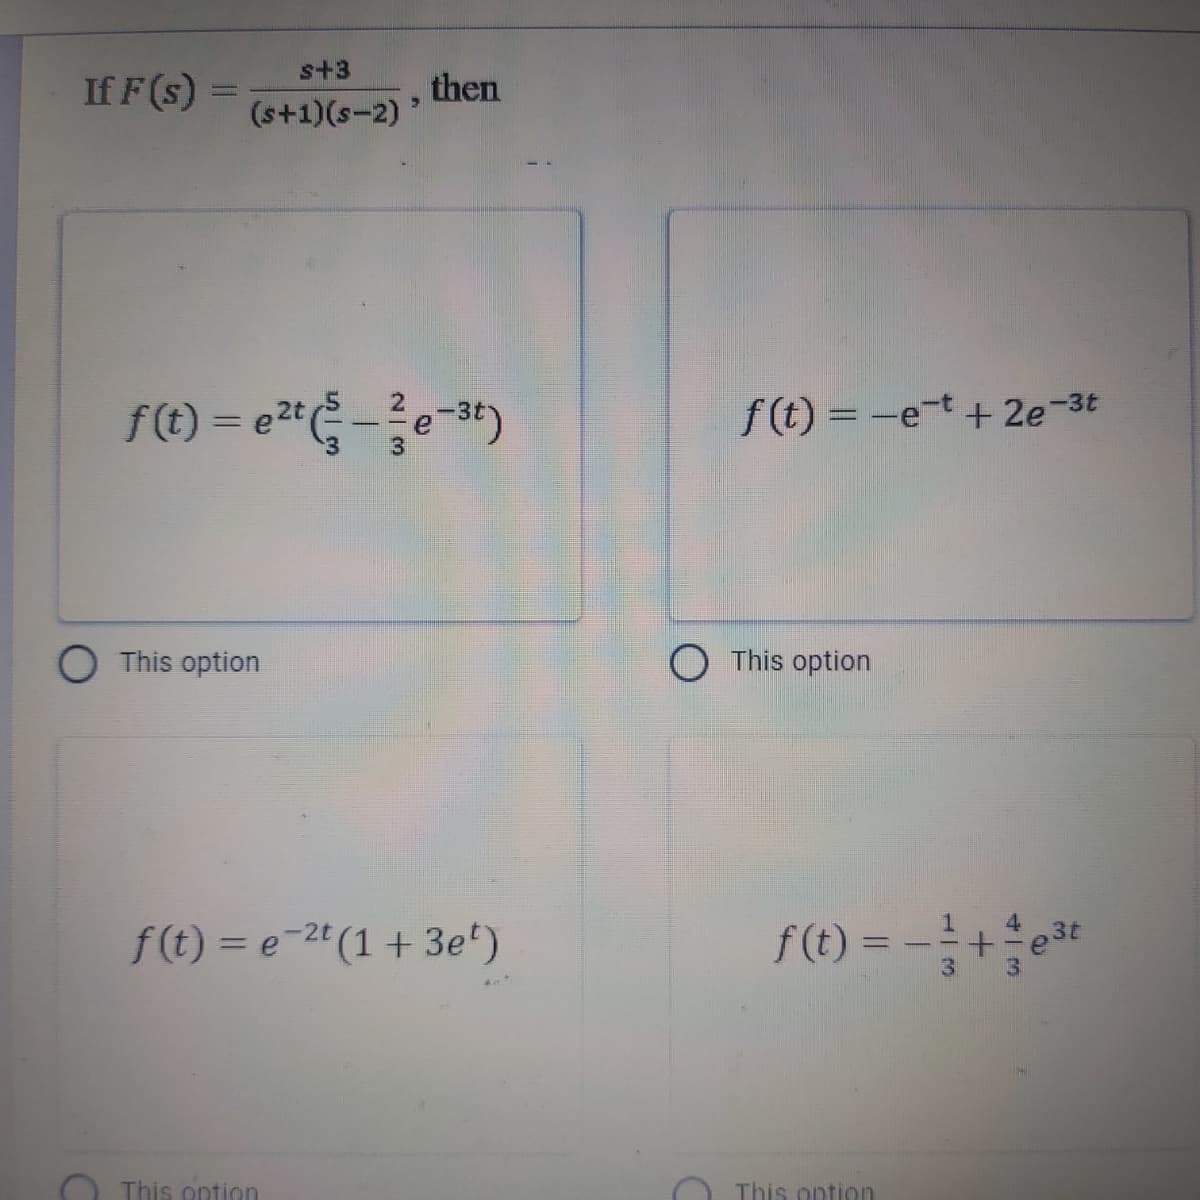 s+3
If F (s) =
then
(s+1)(s-2)
f(t) = e*-
3t)
f(t) = -e-t + 2e-3t
%3D
O This option
O This option
f(1) = -+*
3t
f(t) = e-2"(1 + 3e')
%3D
This ontion
This ontion
